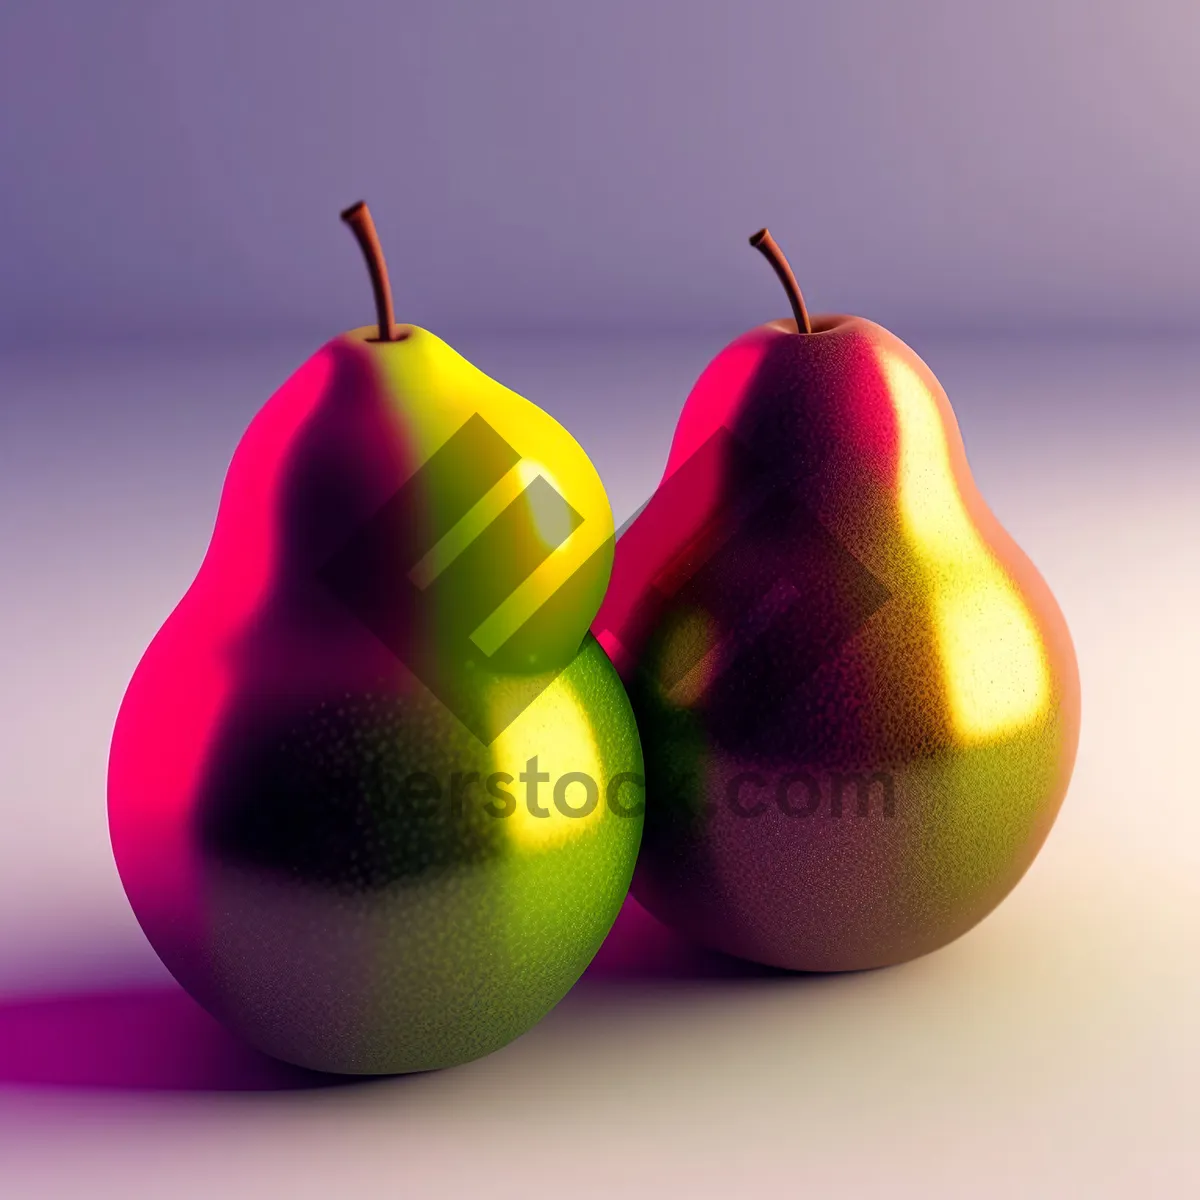 Picture of Fresh and Juicy Apple, a Sweet and Healthy Snack